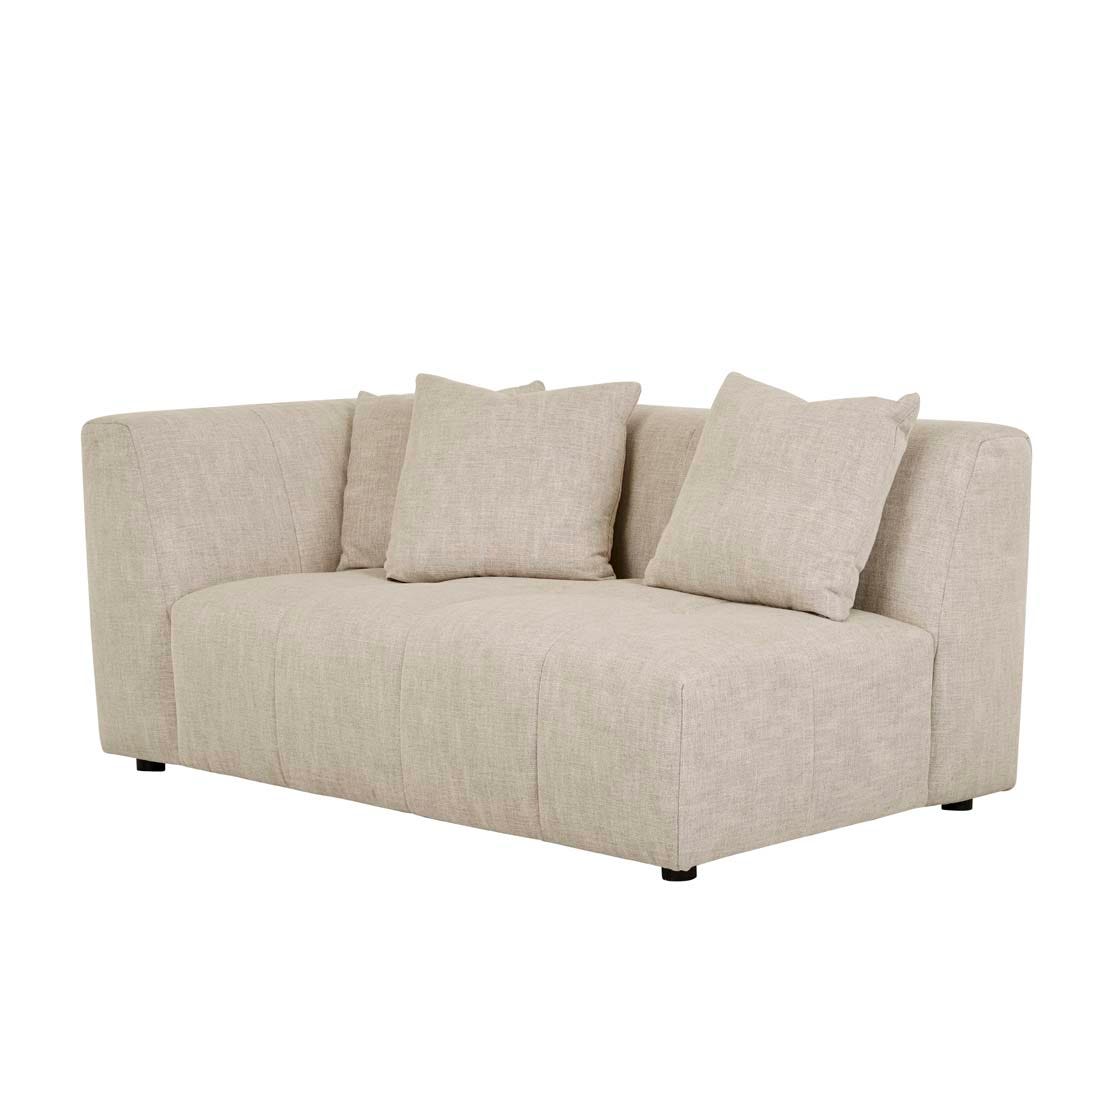 Sidney Slouch 2 Seater Left Arm Sofa - GlobeWest